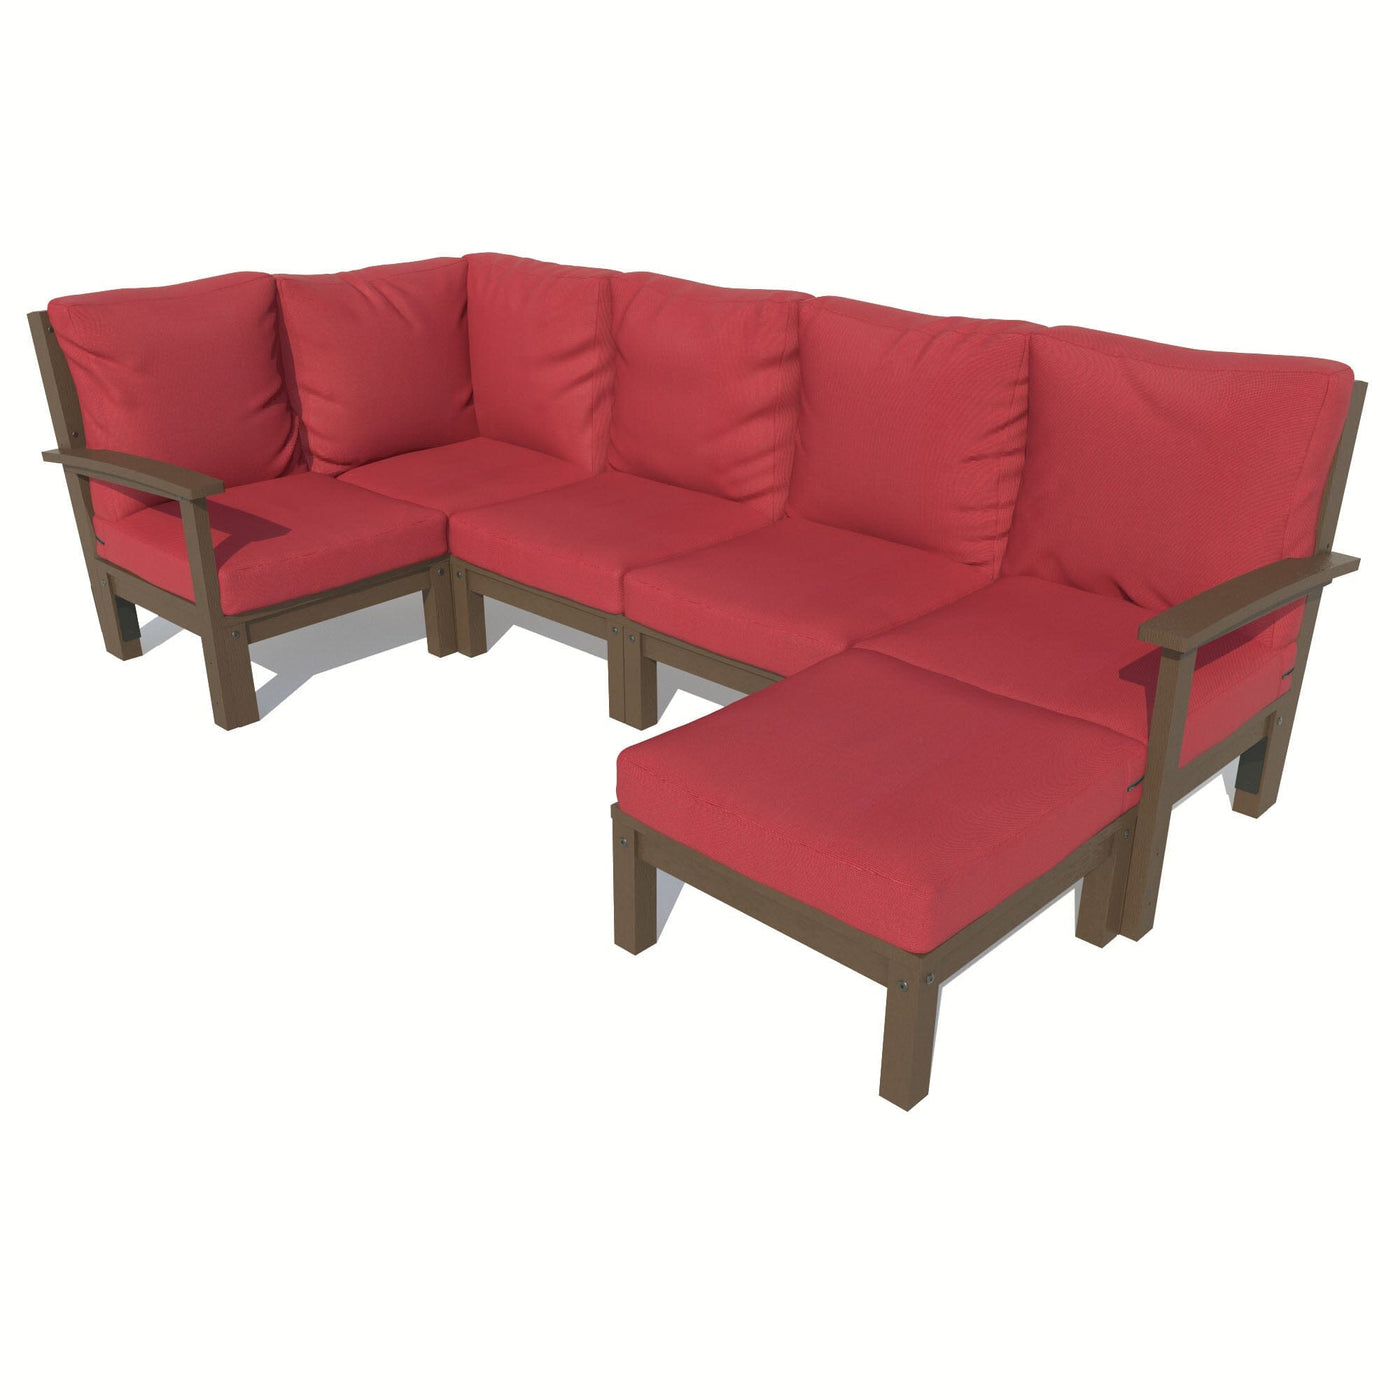 Bespoke Deep Seating: 6 Piece Sectional Set with Ottoman Deep Seating Highwood USA Firecracker Red Weathered Acorn 